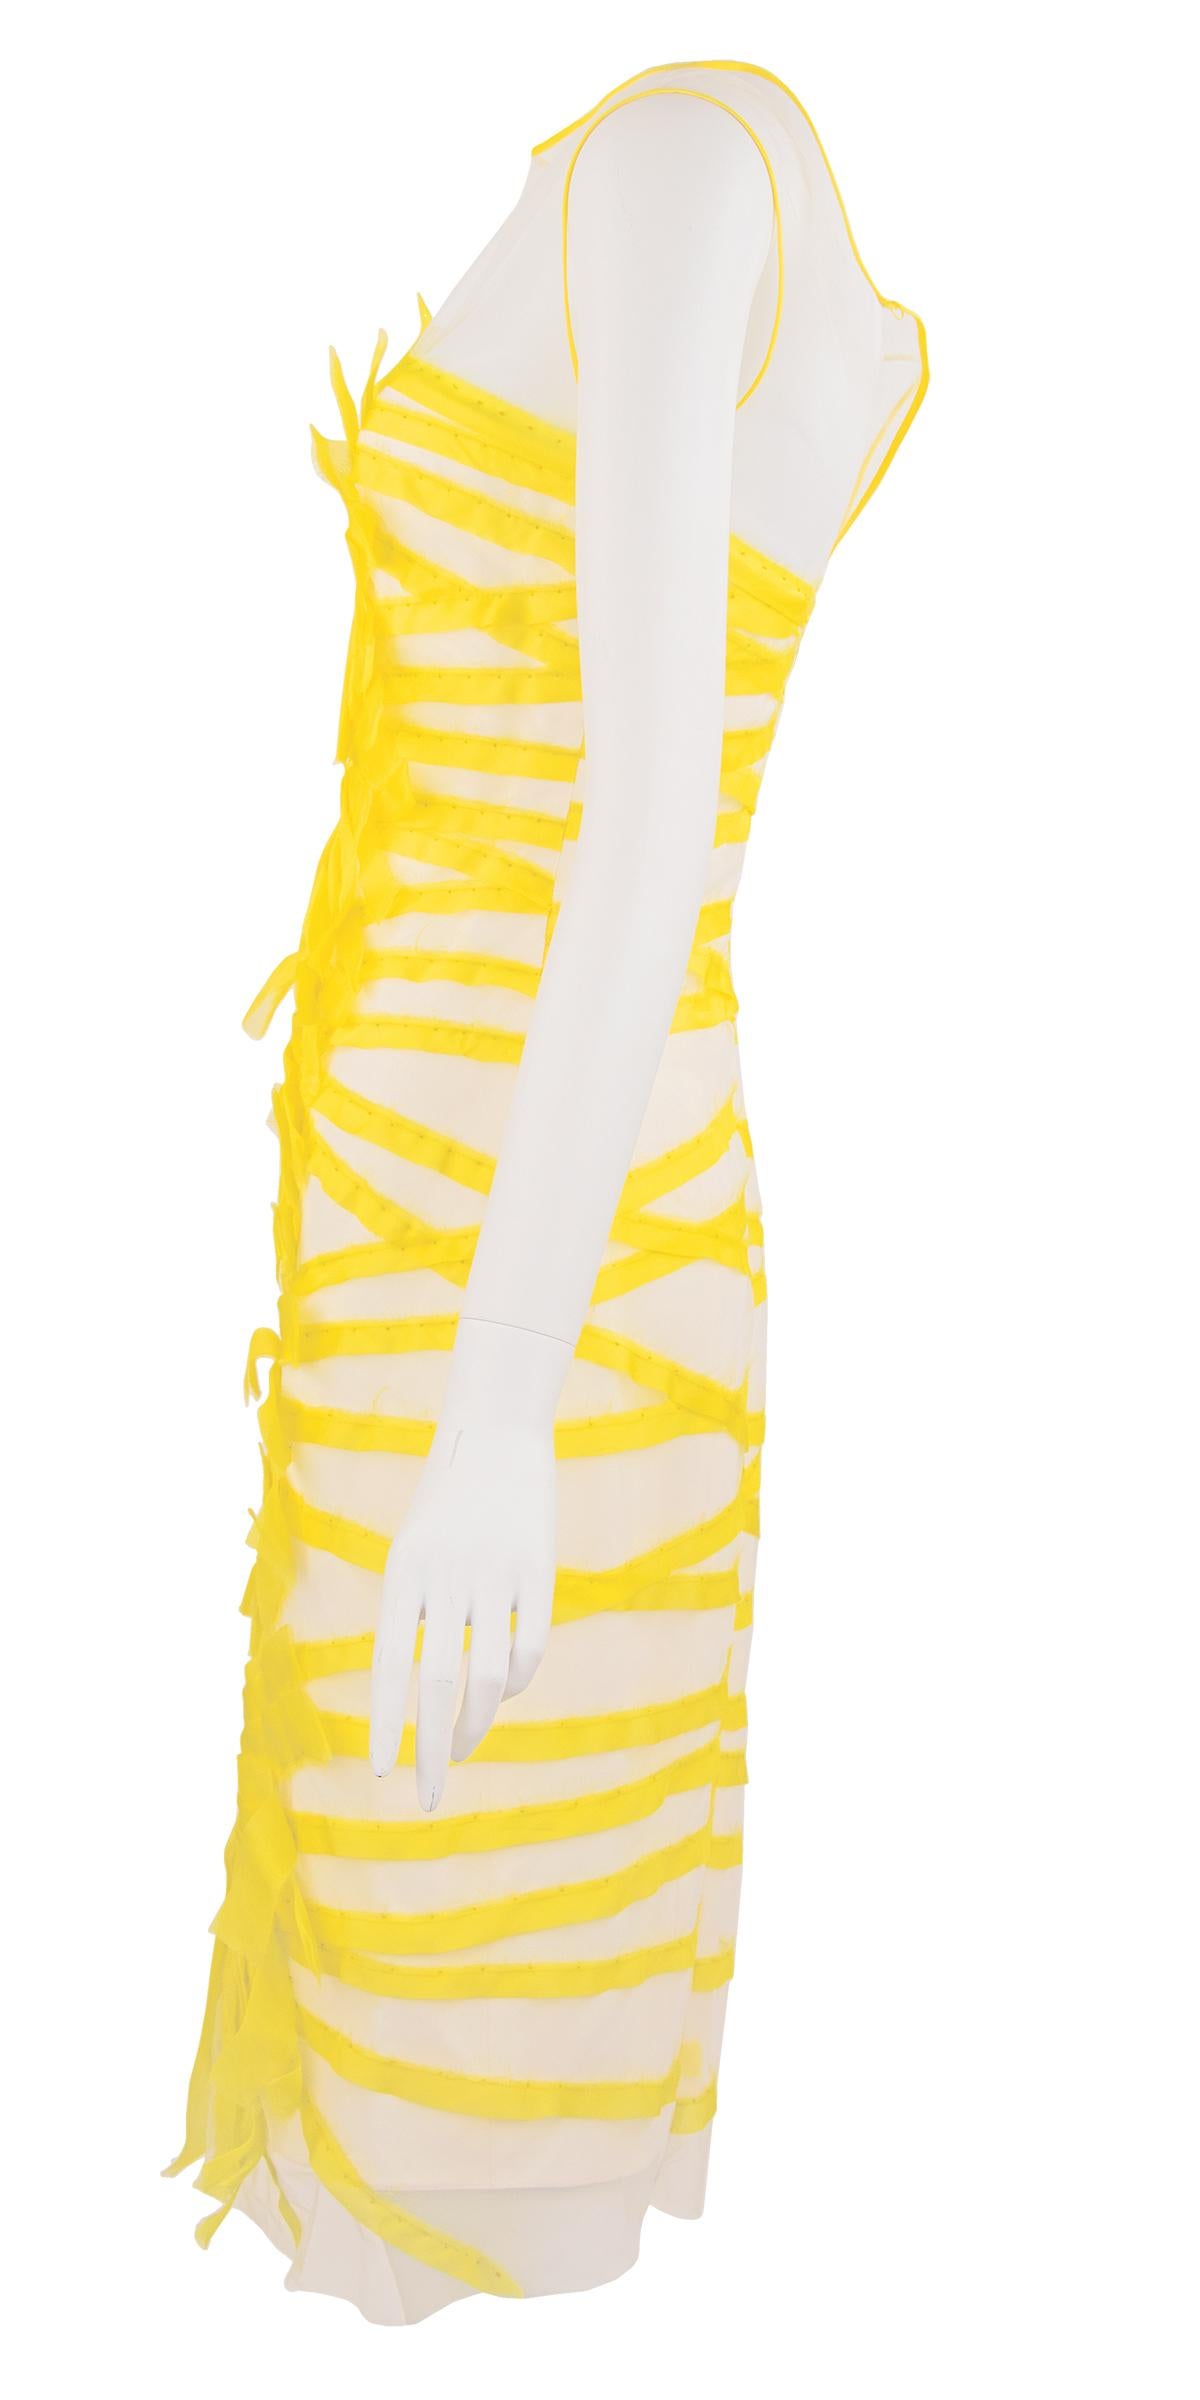 Absolutely gorgeous white tulle dress with yellow bias strip design, by renowned evening wear designer, Angel Sanchez.  Perfect dress for a spring or summer cocktail party.  

Size: US 2

Condition: New with tags

Composition: 100% silk

Made in the